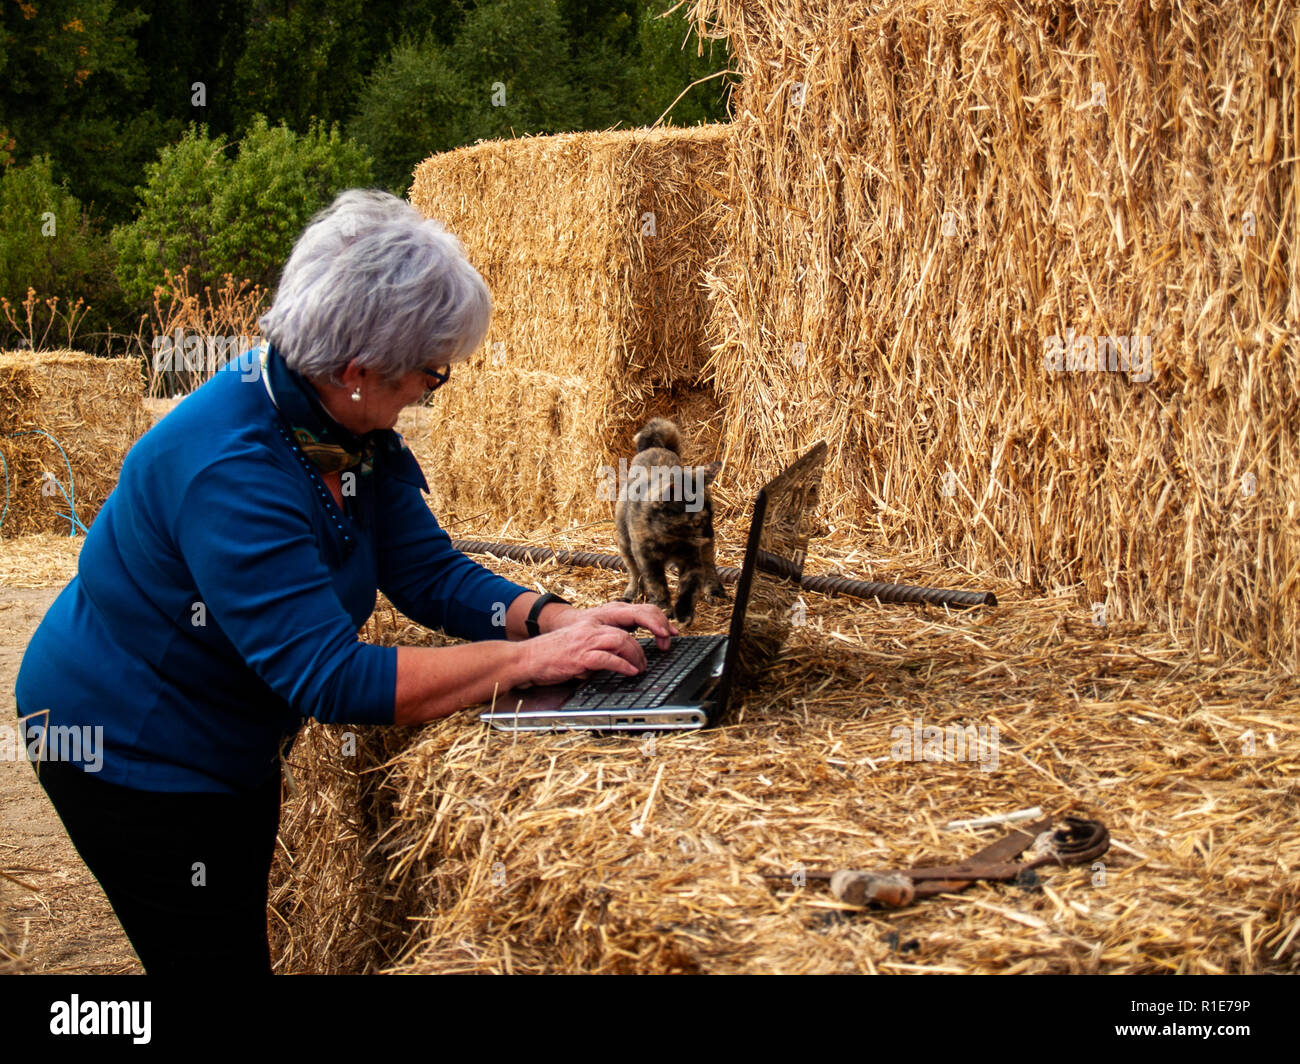 An entrepreneur senior woman working outdoor on a farm with a laptop over a hay bale Stock Photo